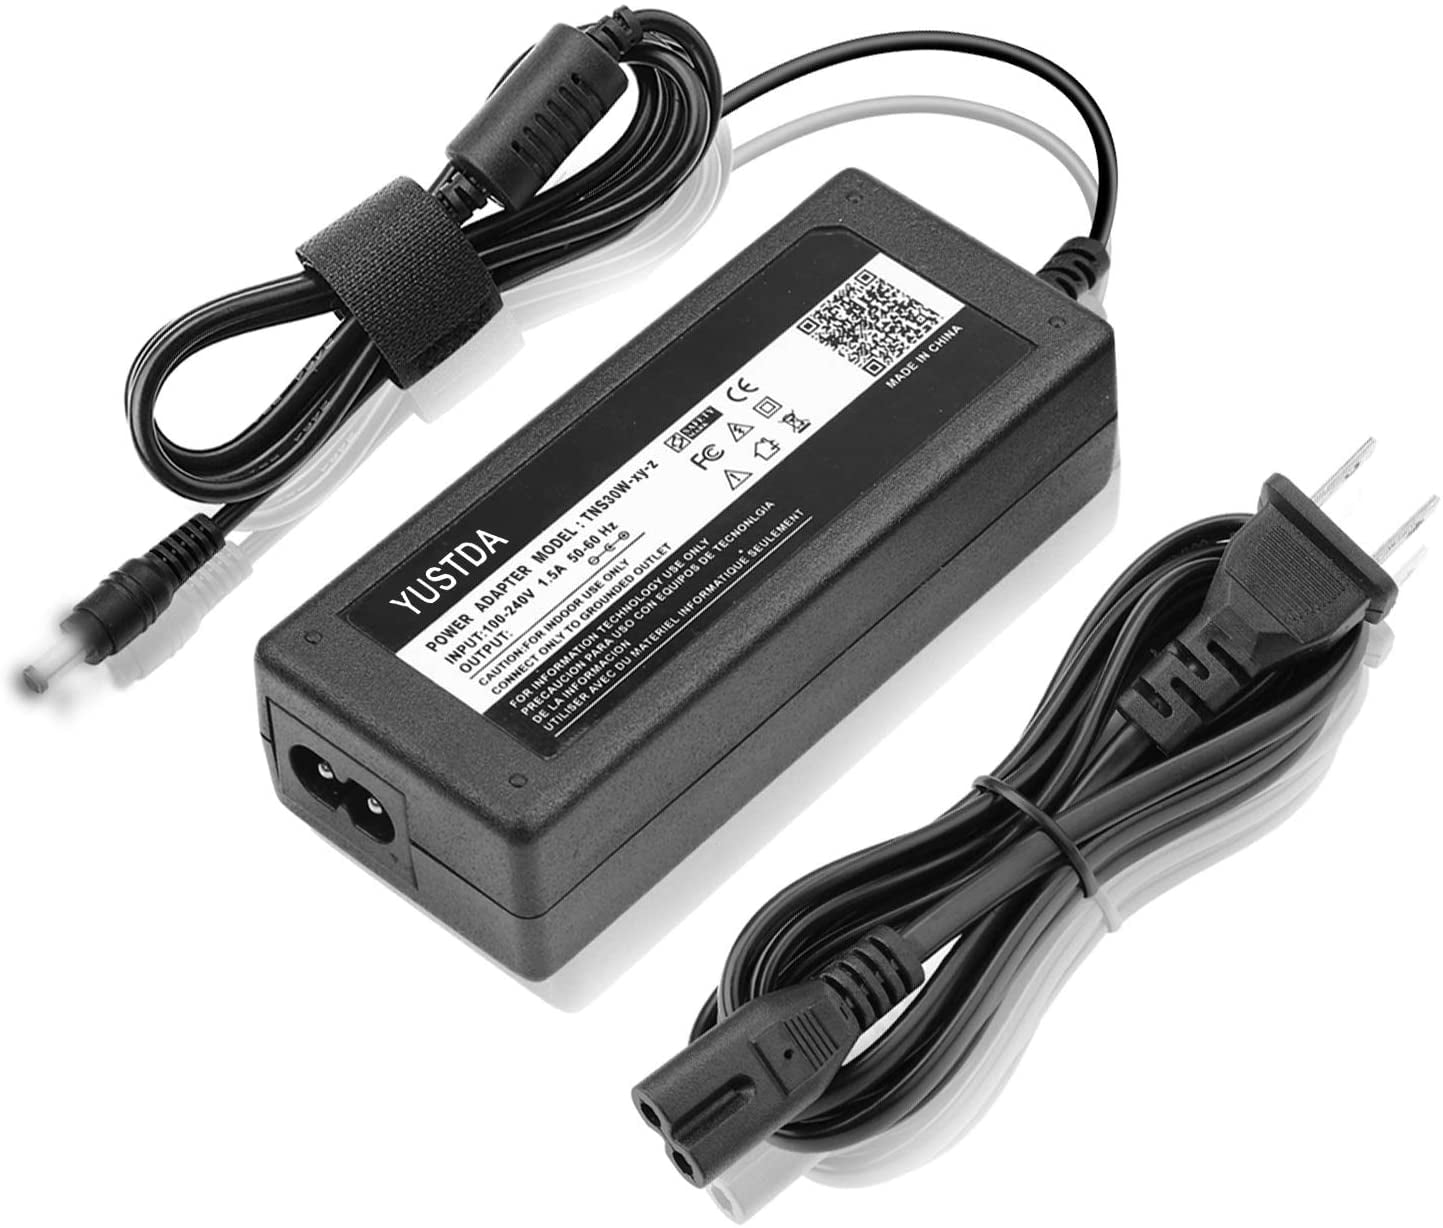 AC Adapter For Elgato Systems 10024020 Thunderbolt 2 Dock Charger Power Supply 